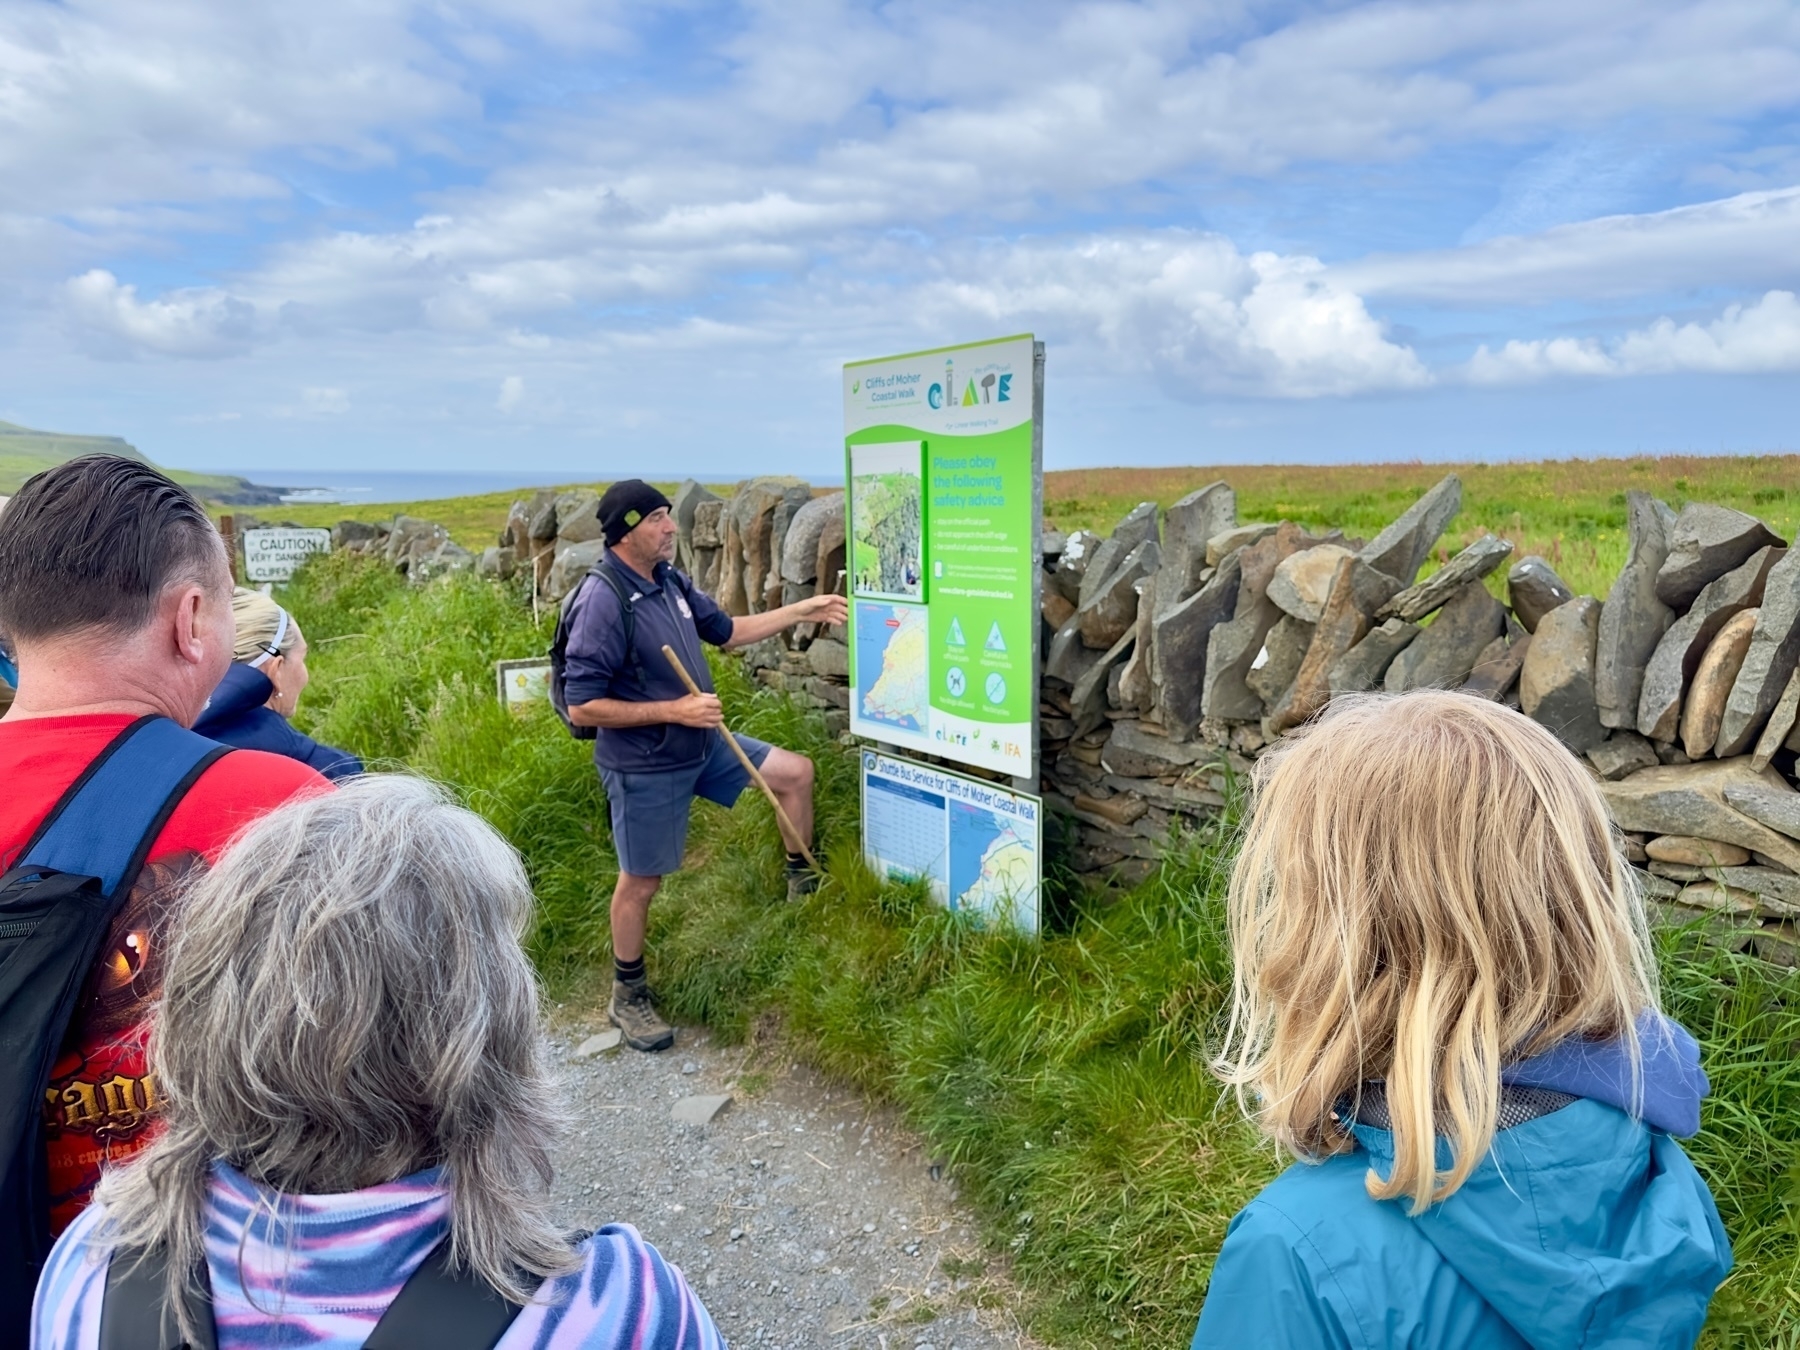 Auto-generated description: A group of people is gathered around a man giving a presentation in front of an informational sign outdoors, with a stone wall and grassy field in the background.